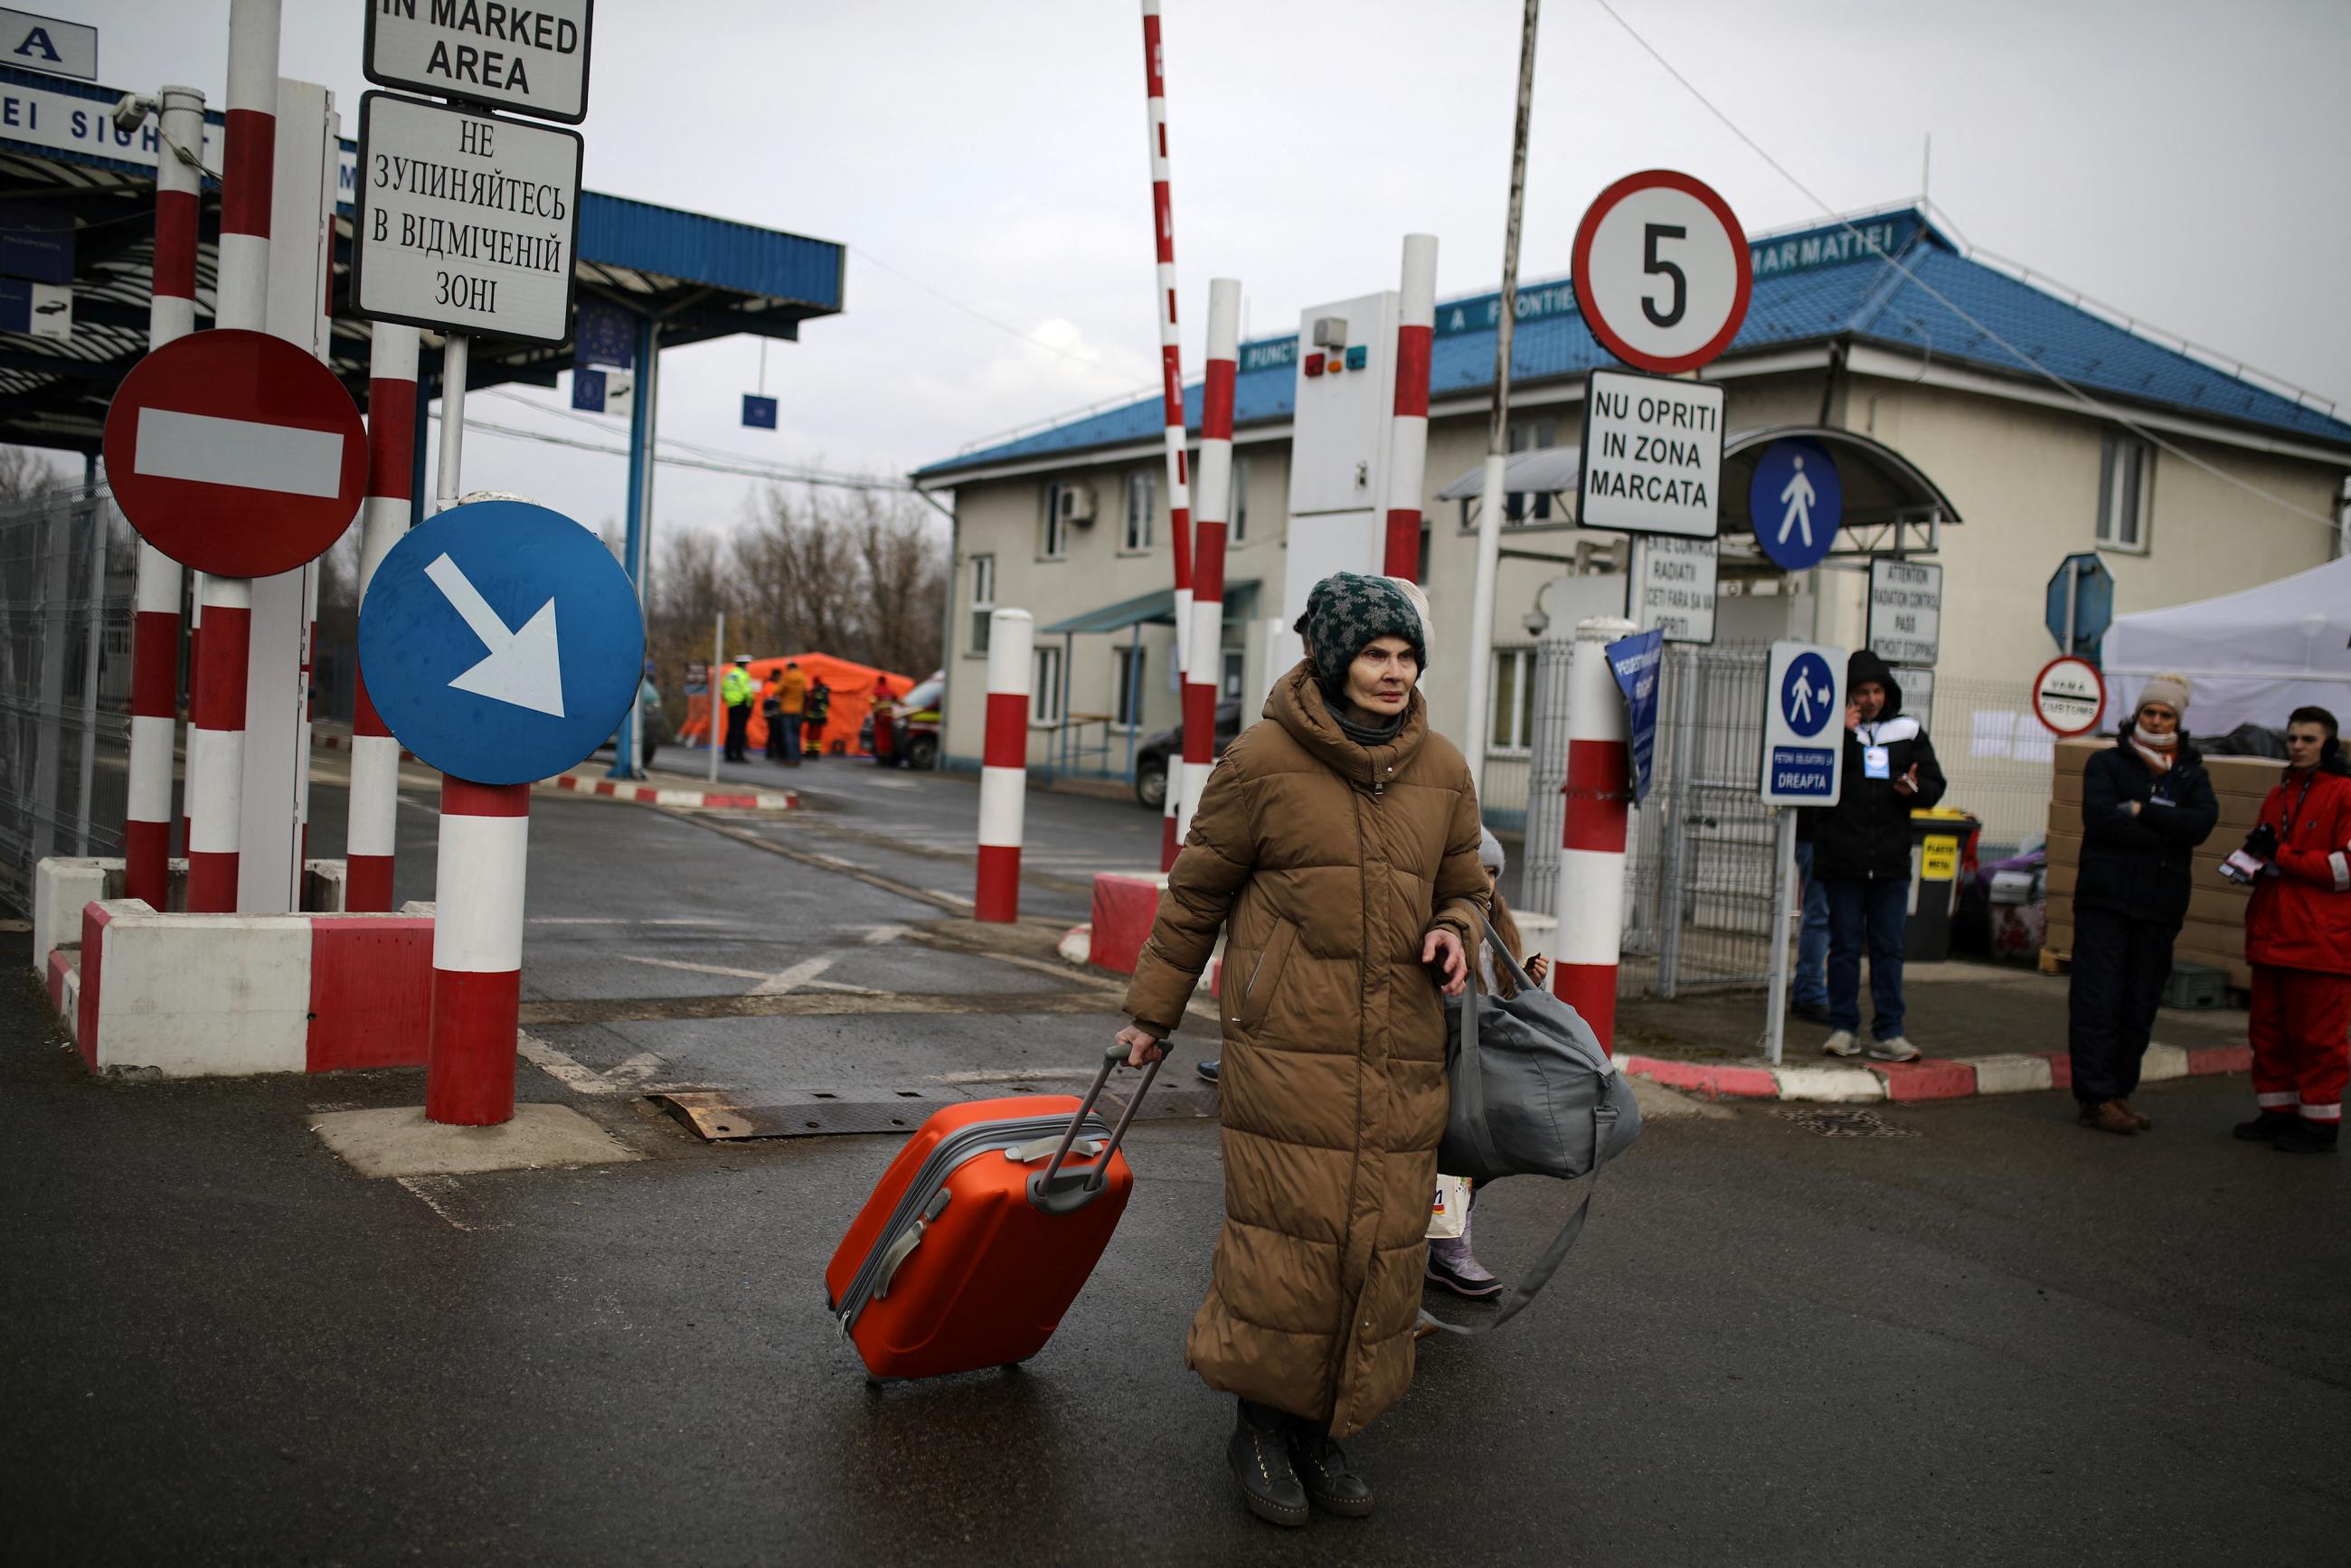 A woman carries her luggage after fleeing from Russia's invasion of Ukraine, at the border crossing in Sighetu Marmatiei, Romania.